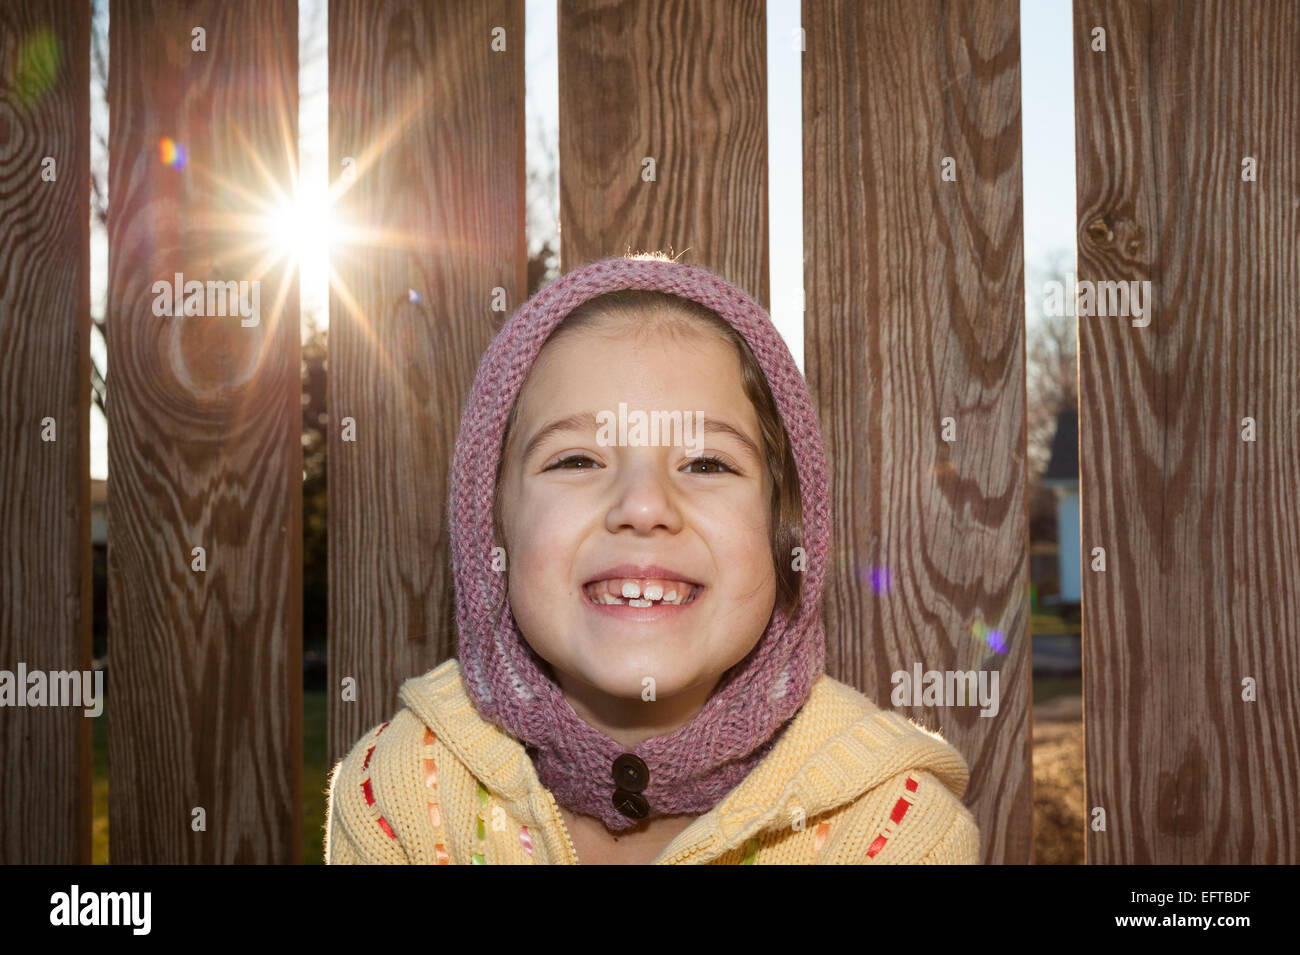 Young girl in knitted hat and sweater with a cute smile in front of a wooden fence. Stock Photo